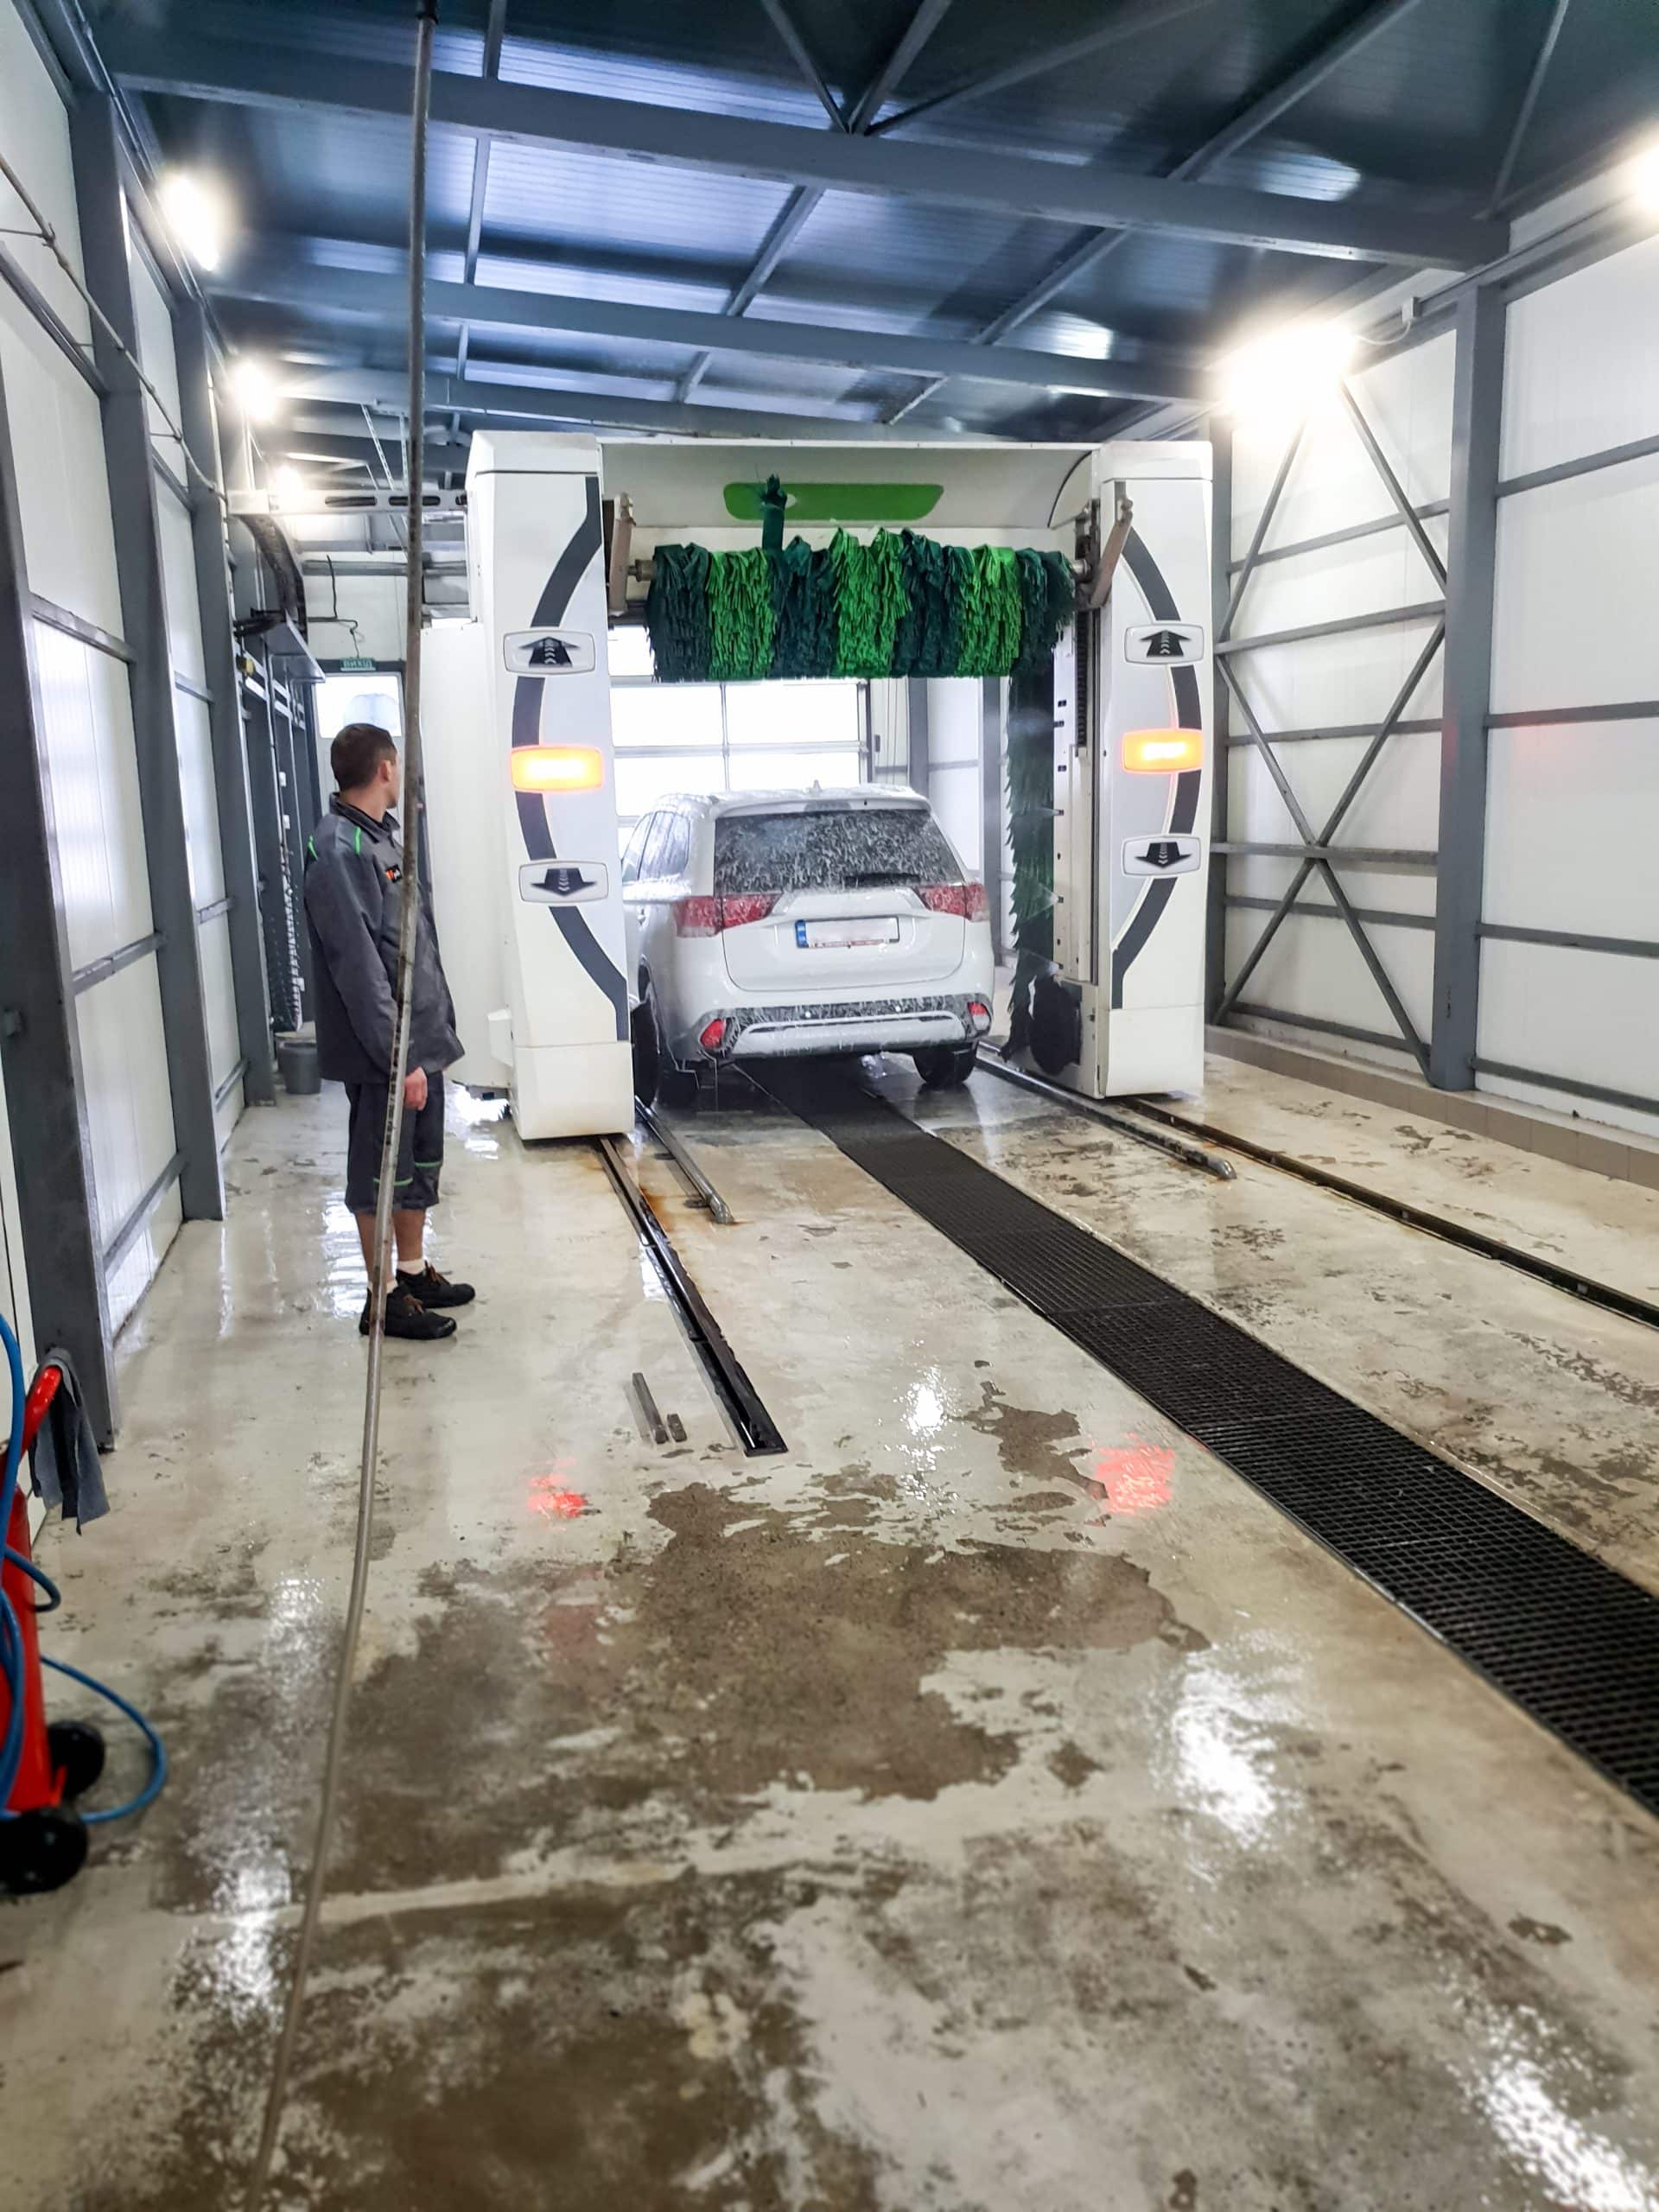 A car is going through an automated wash as an attendant supervises the process inside a wash bay.